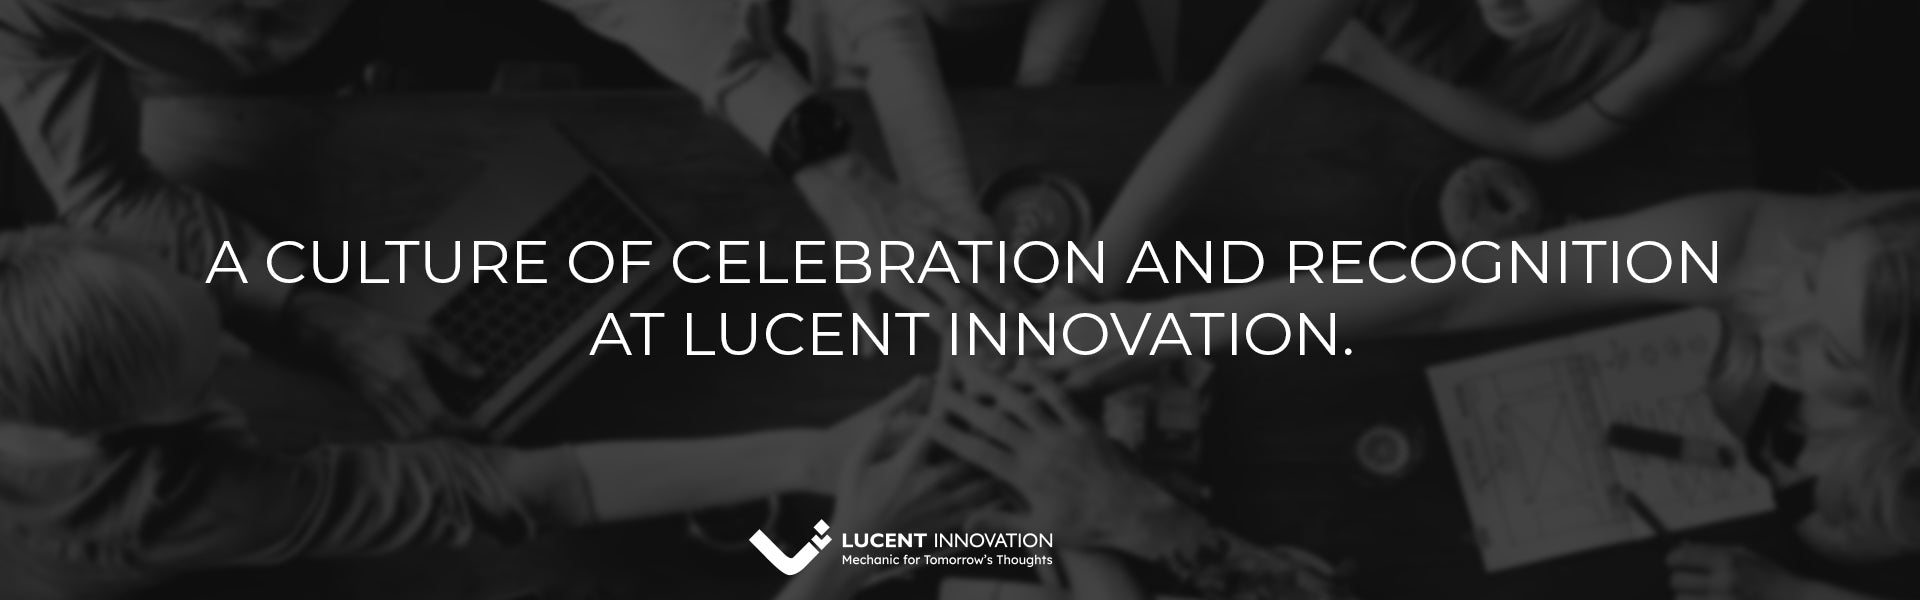 A culture of celebration and recognition at Lucent Innovation.